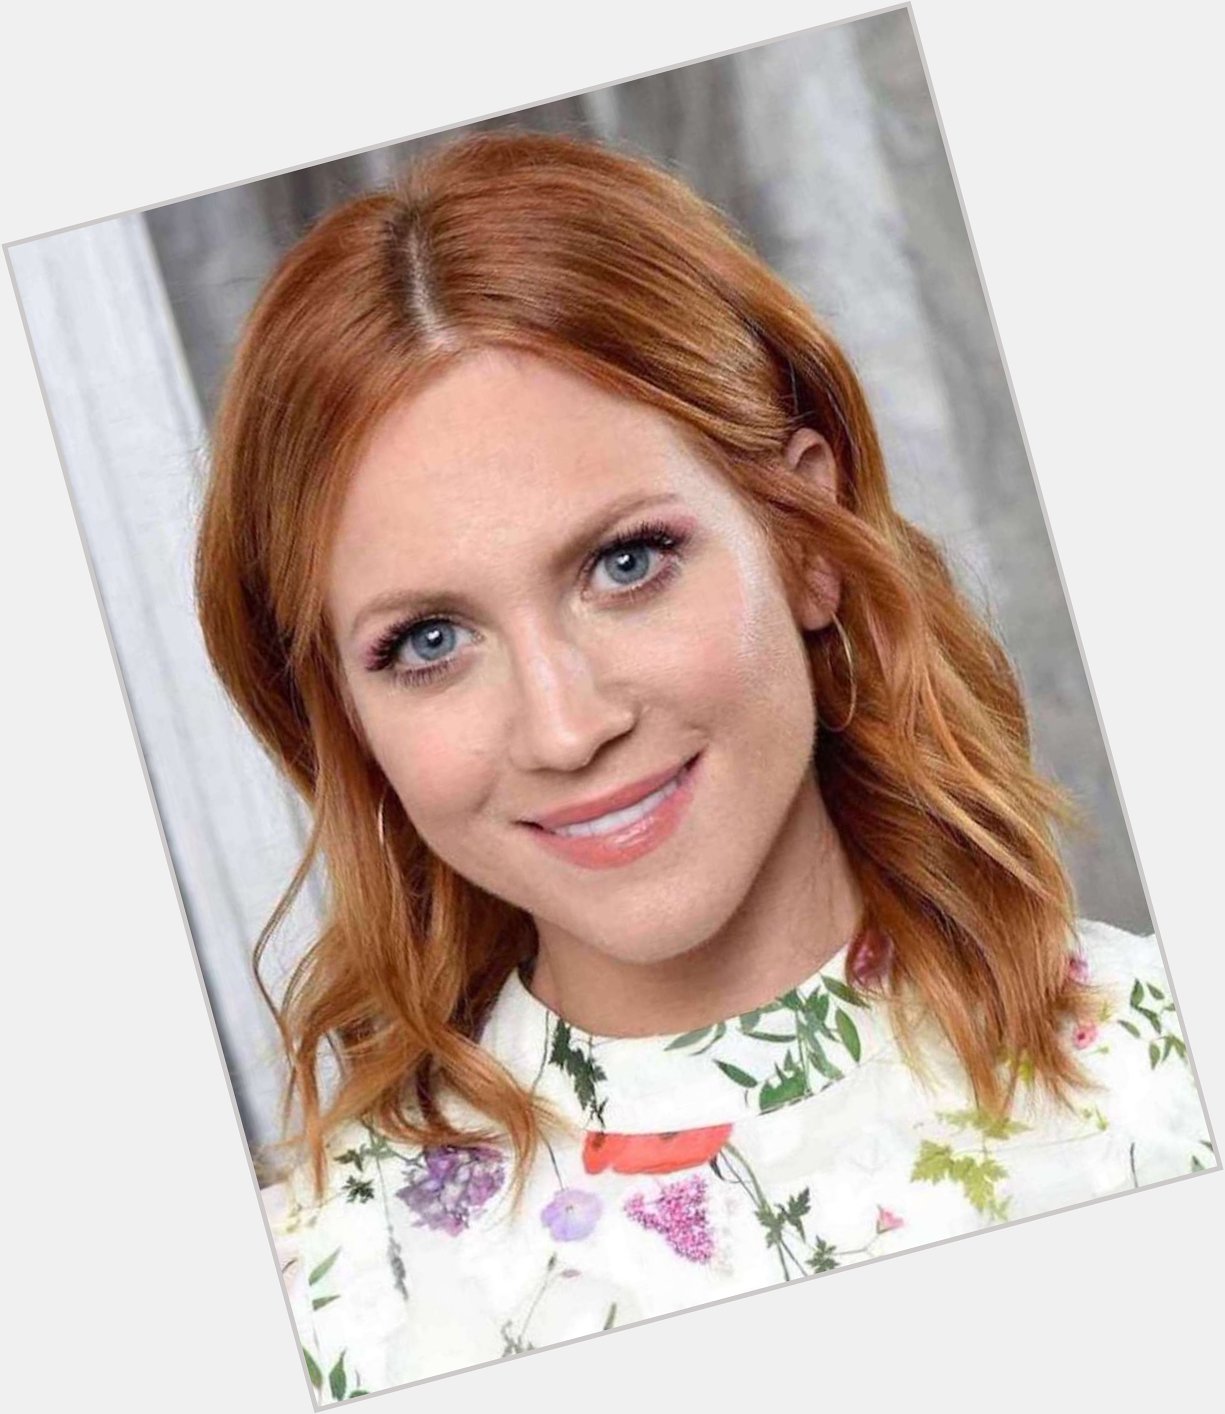 Happy Birthday to the lovely Brittany Snow 